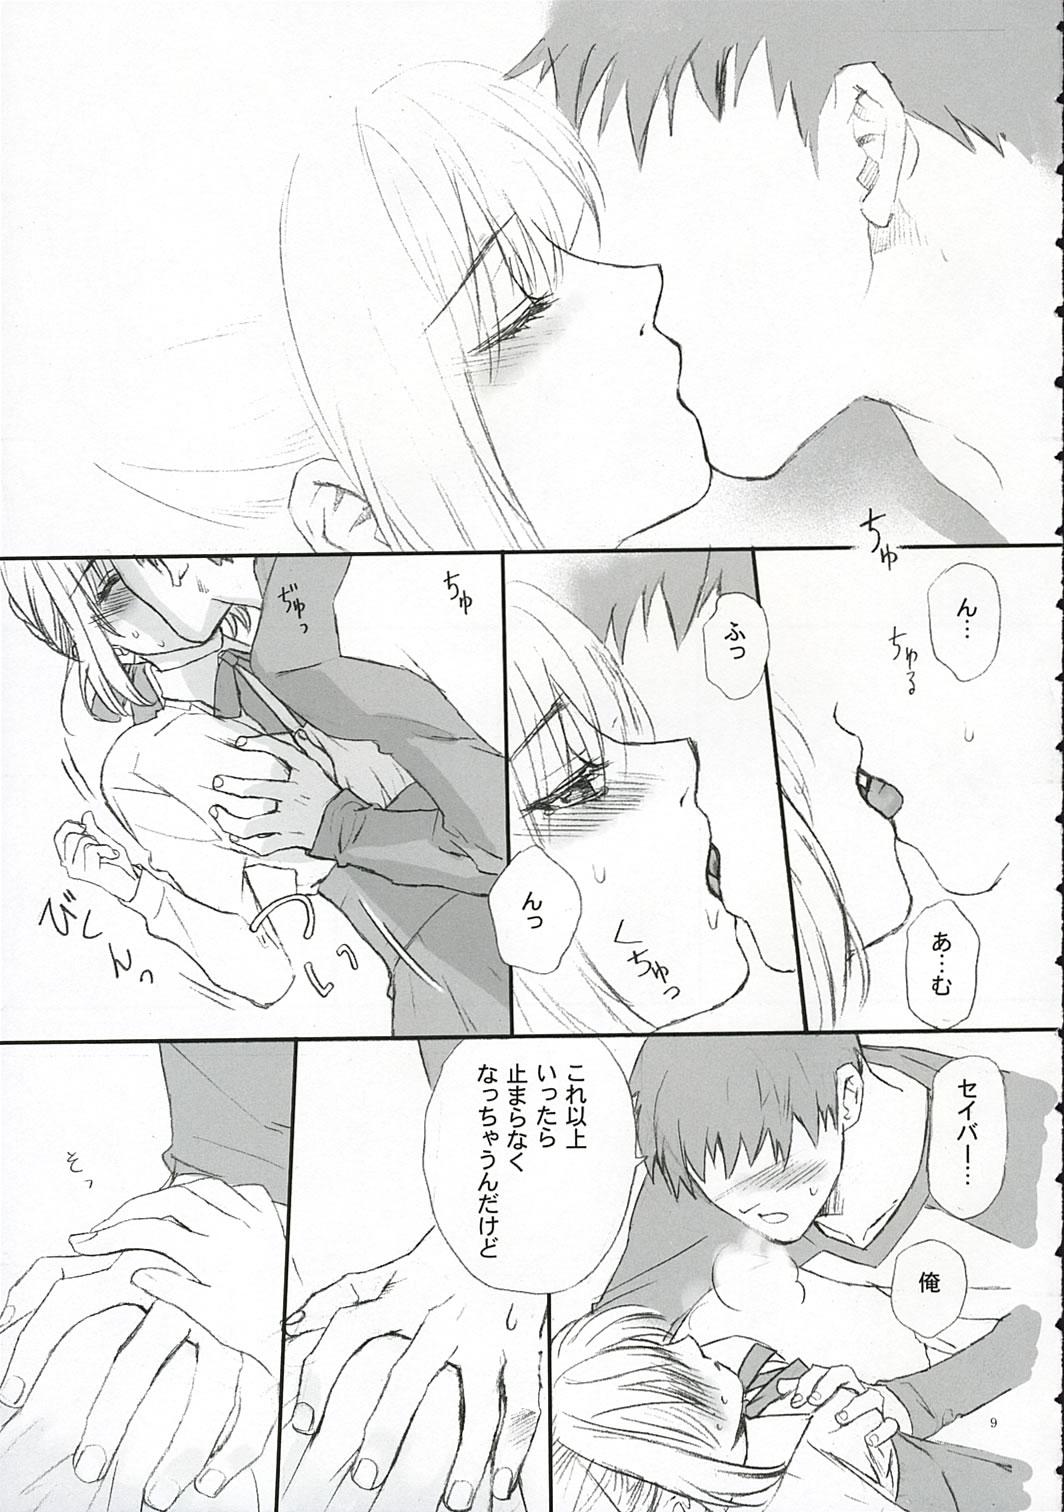 Humiliation Love Soulful - Fate stay night Lesbian Porn - Page 8